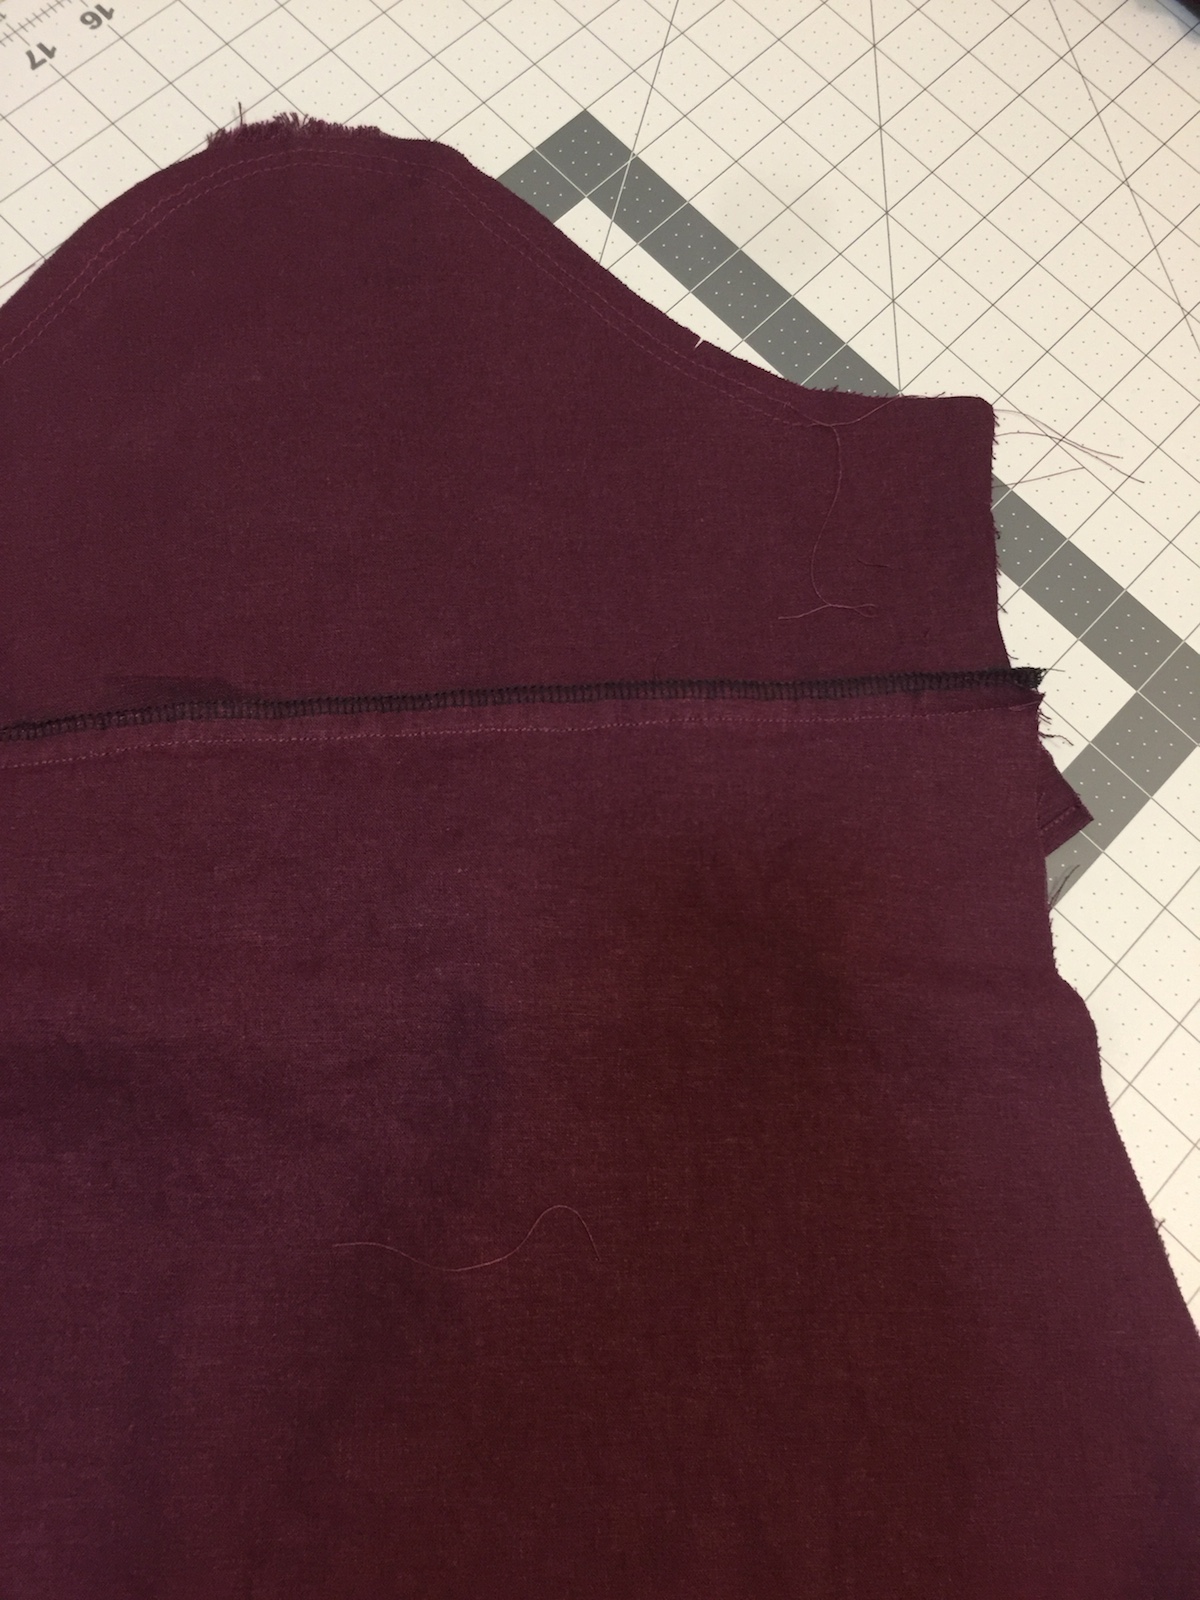 How to Draft and Sew Bishop Sleeves - WeAllSew